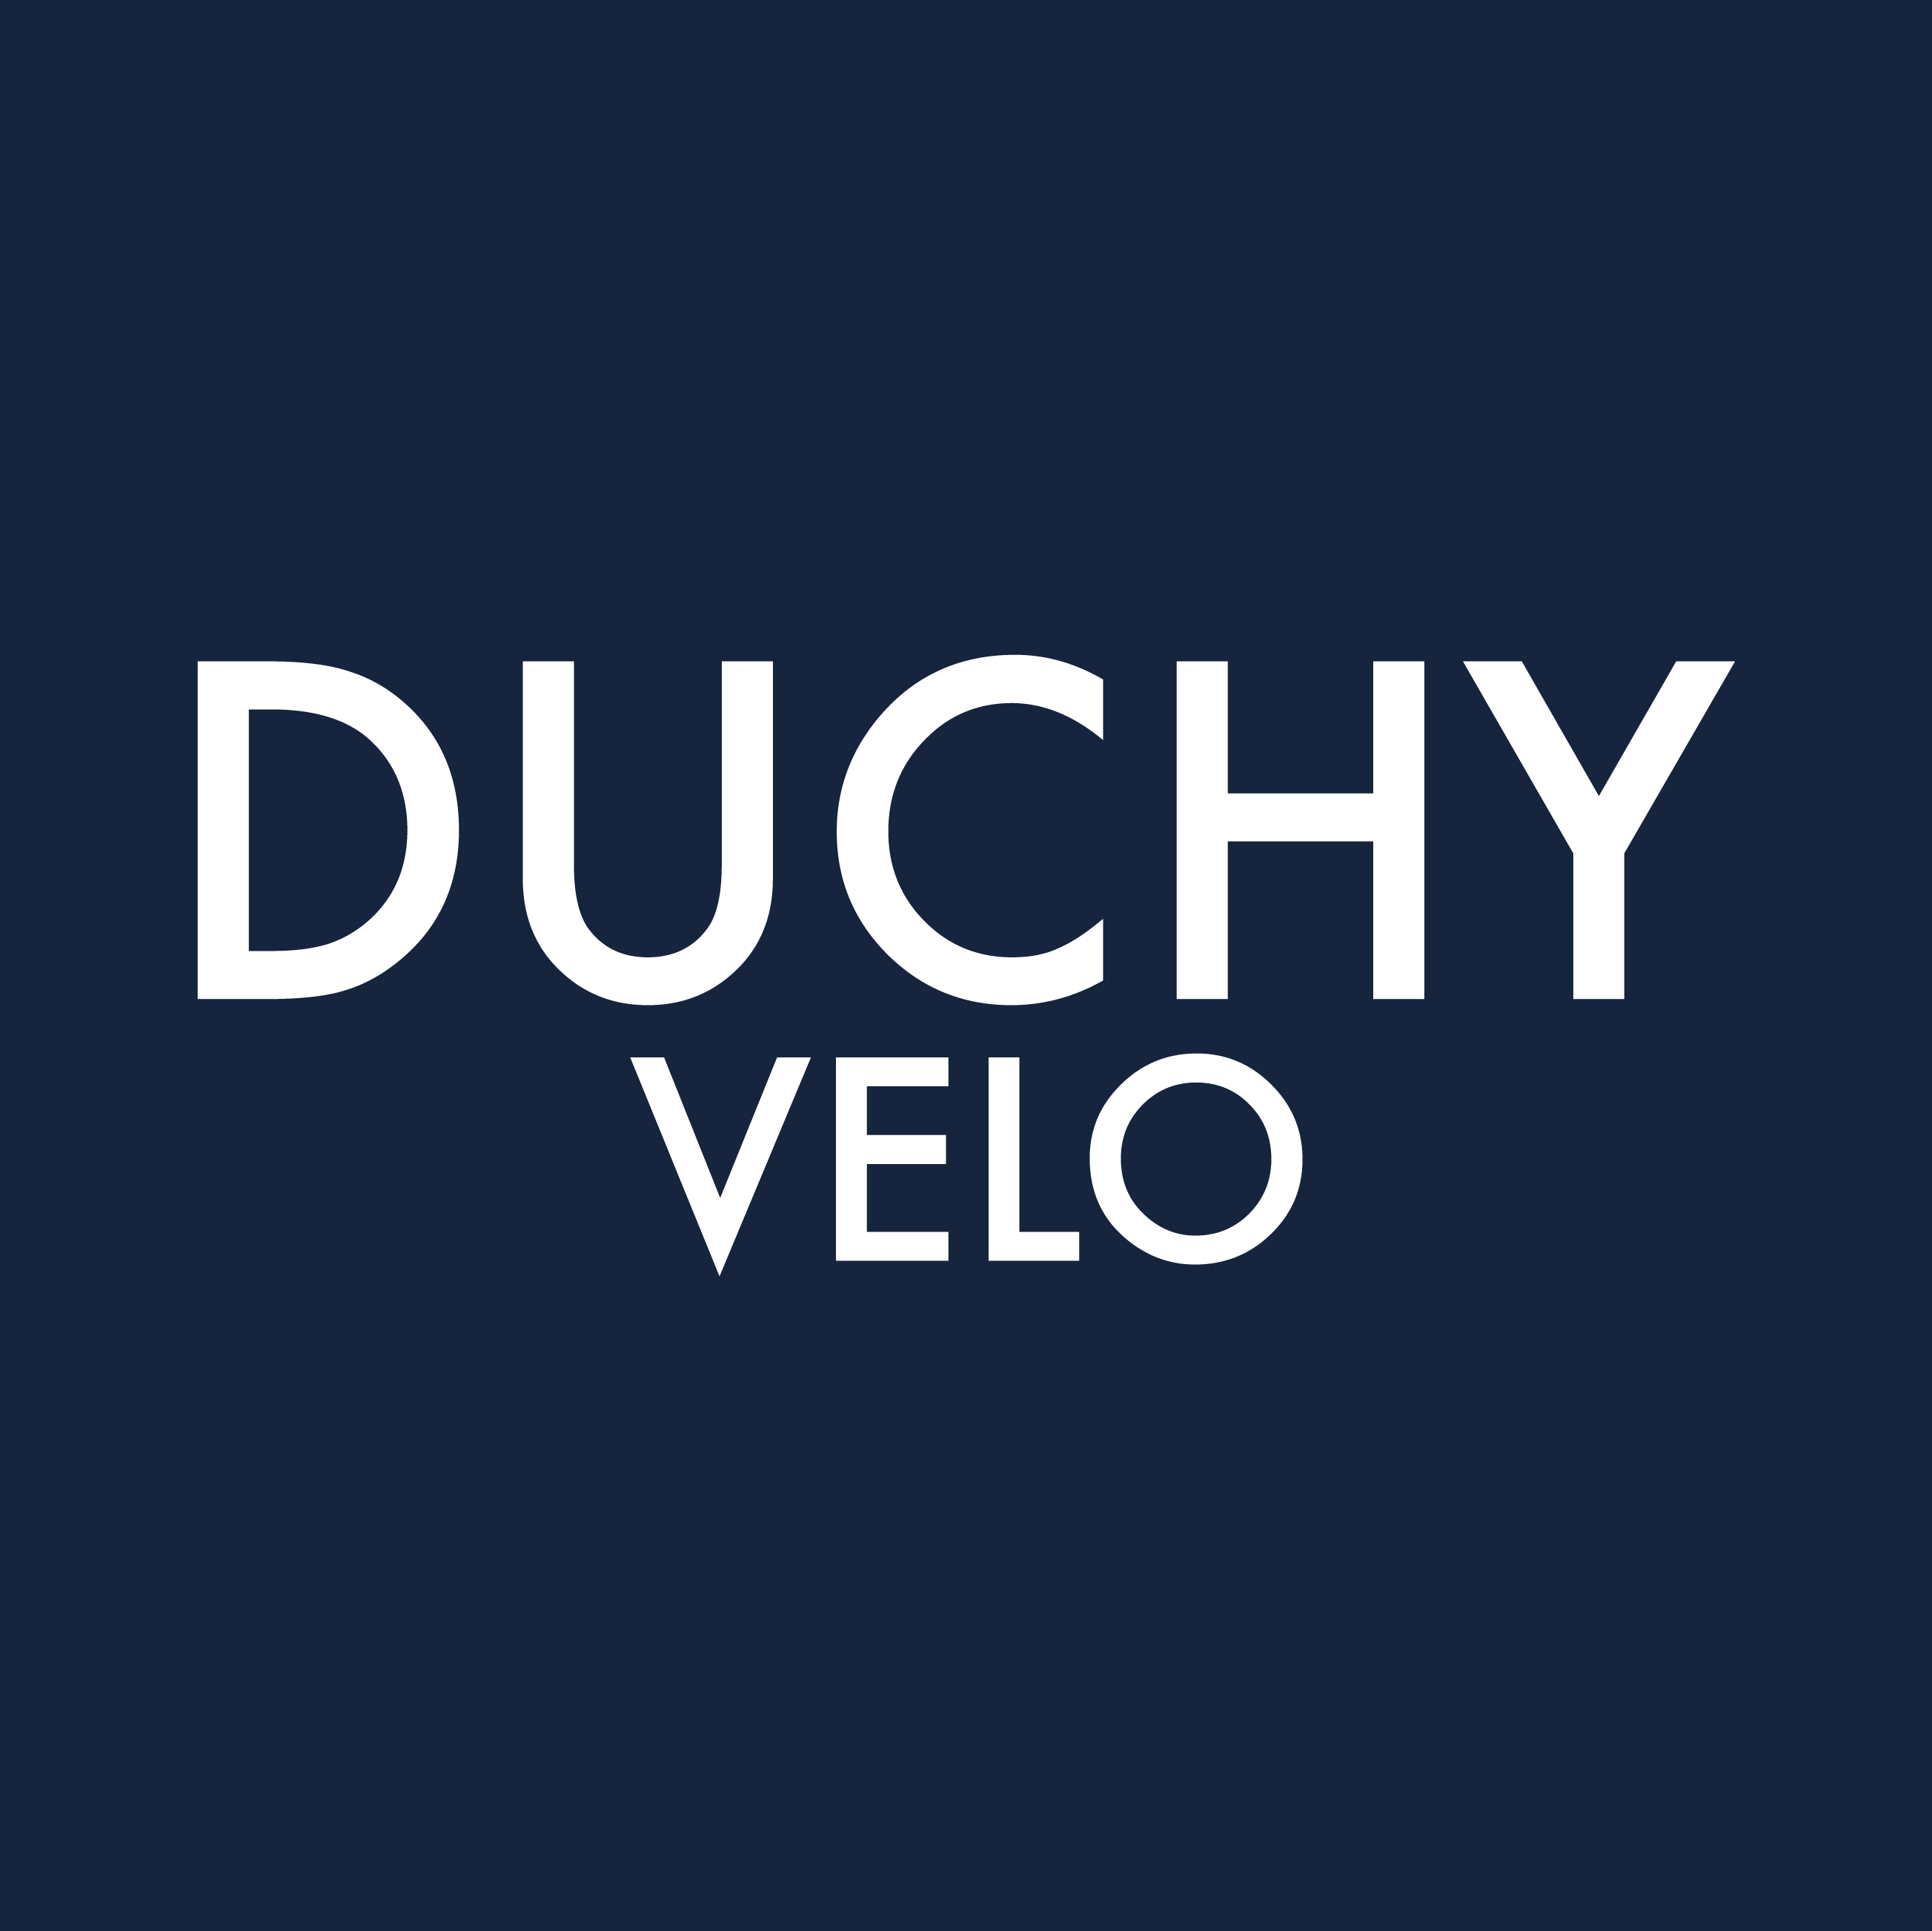 Club Image for DUCHY VELO